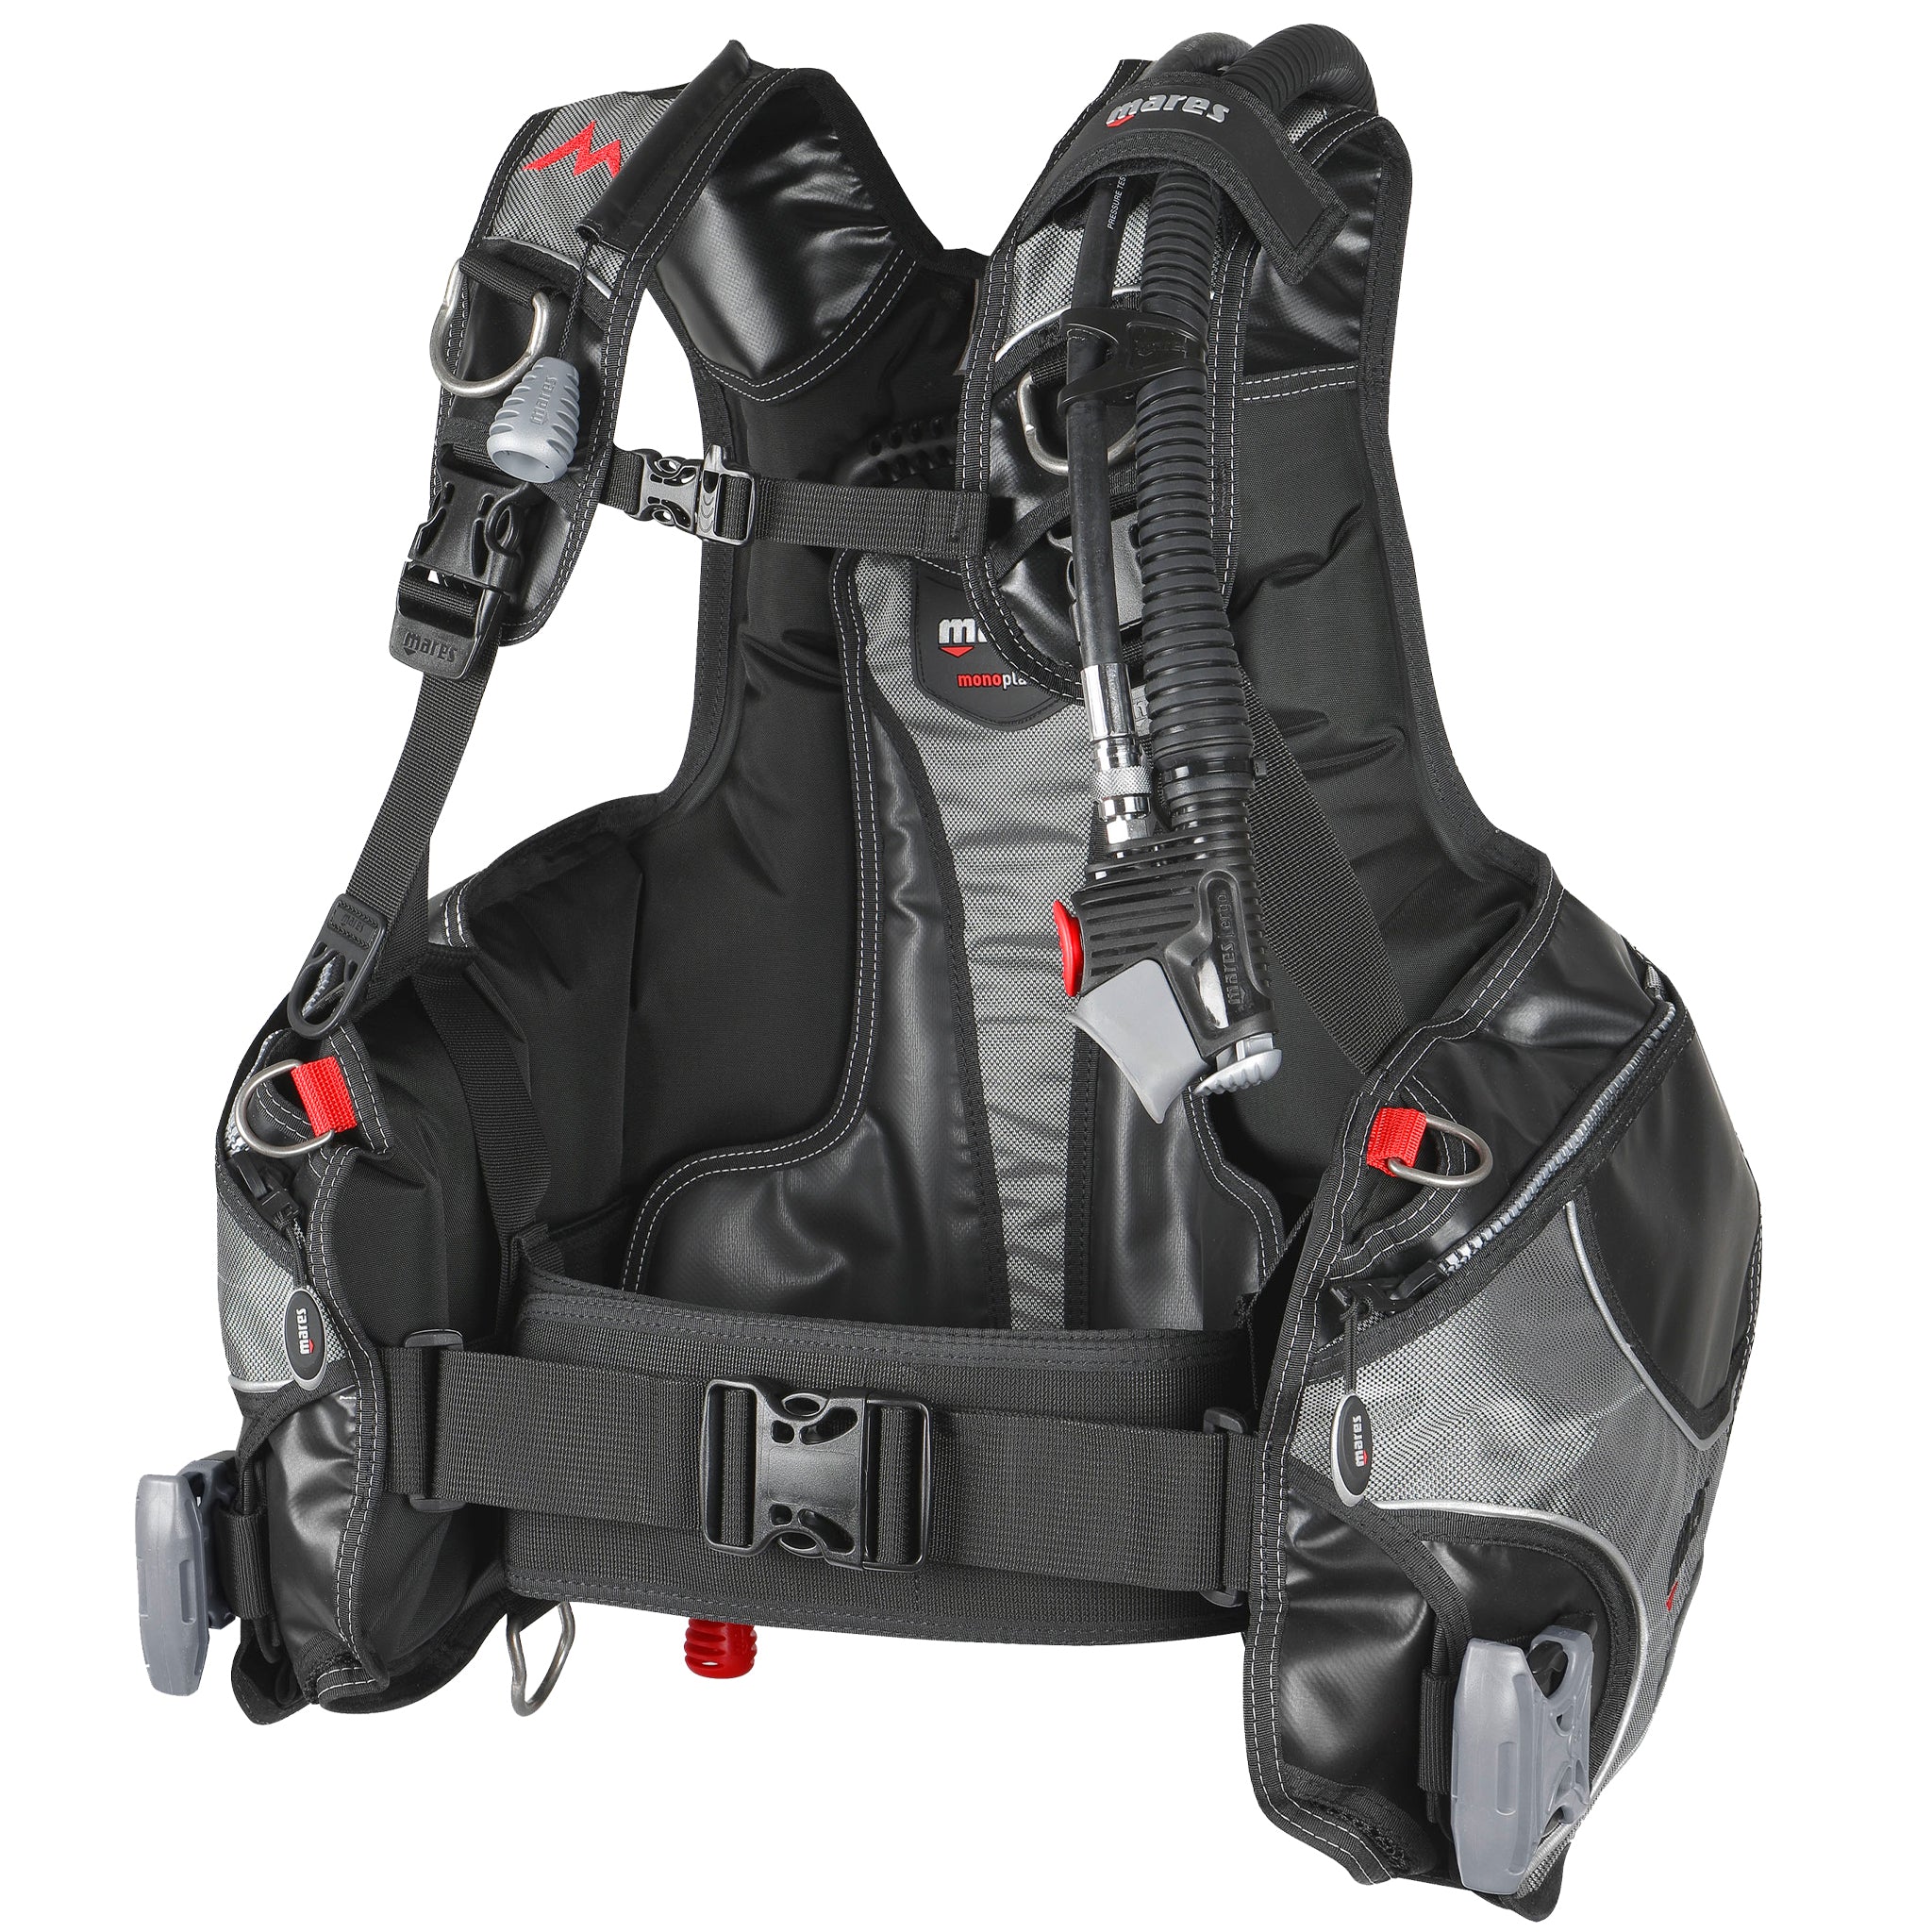 Mares Rock Pro Diving BCD